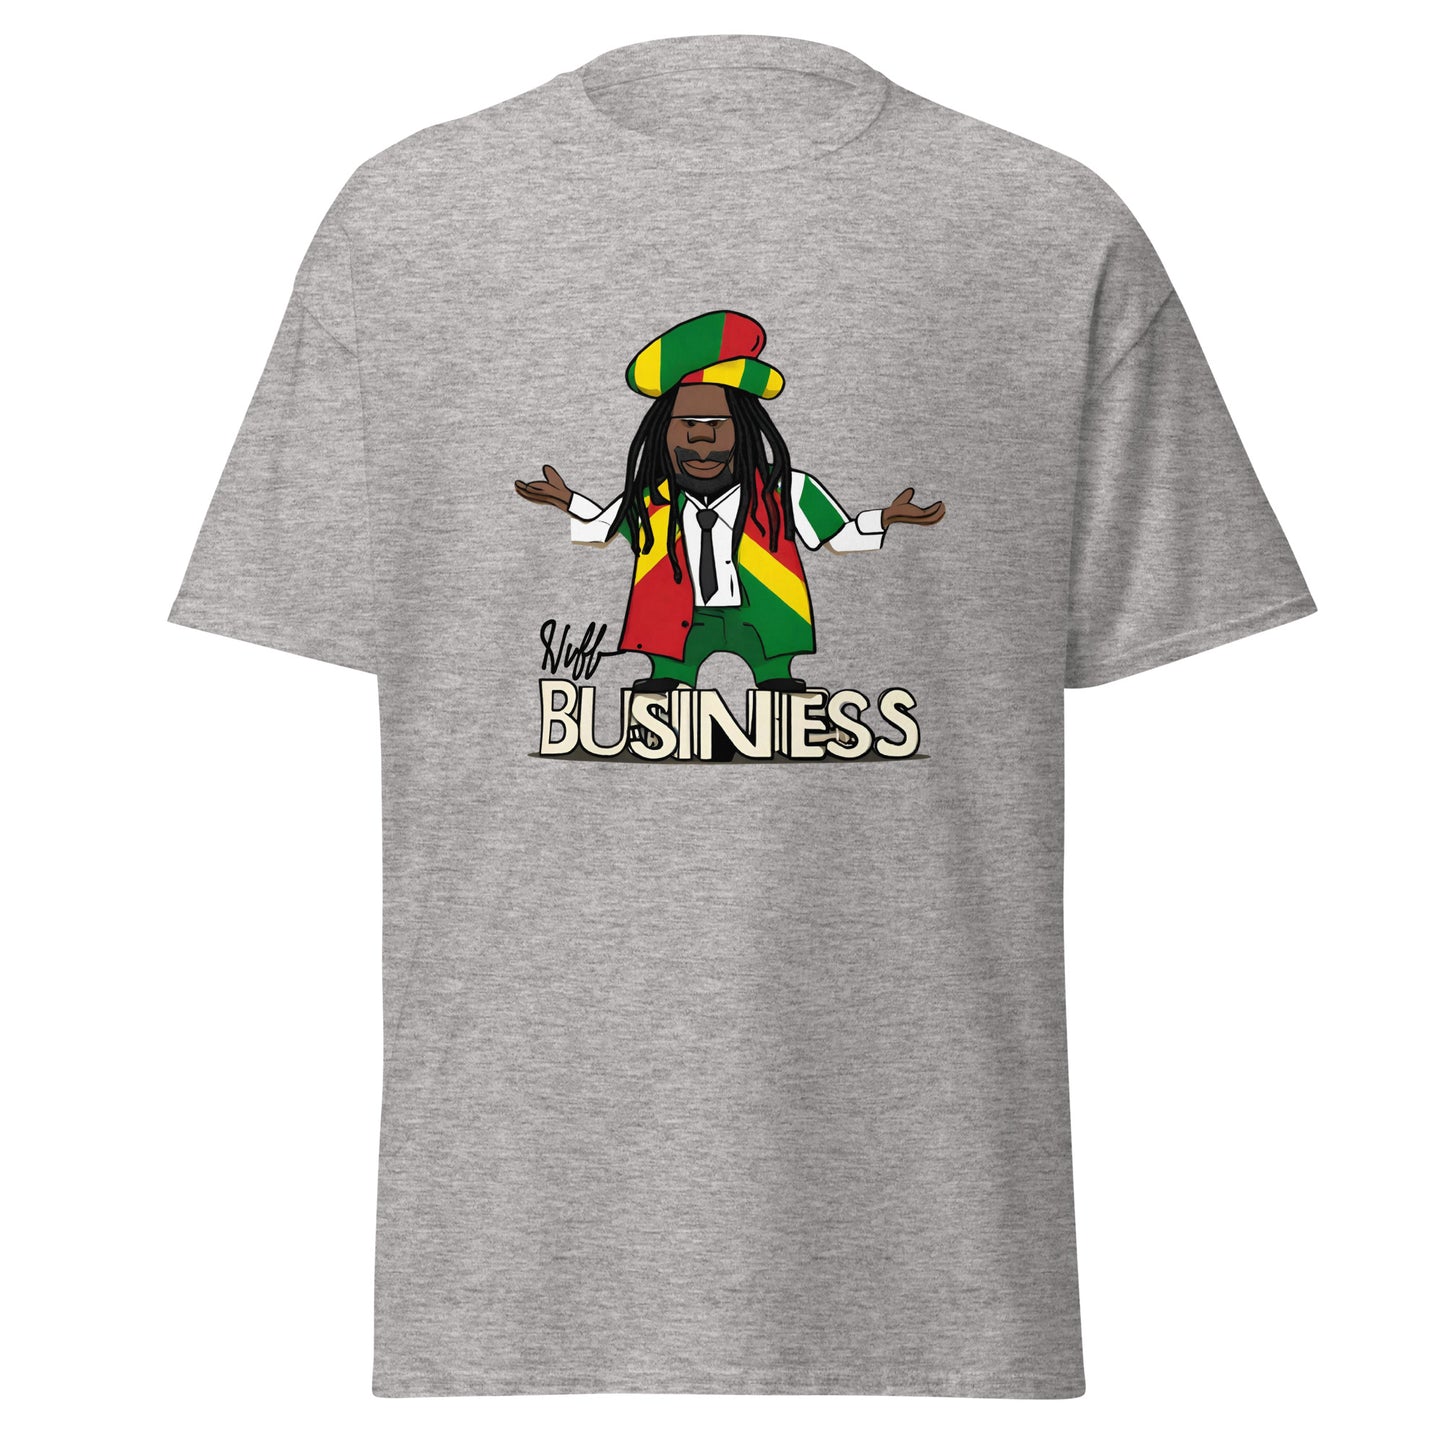 Stand on NUFF Business - Men's T-shirt (BN)